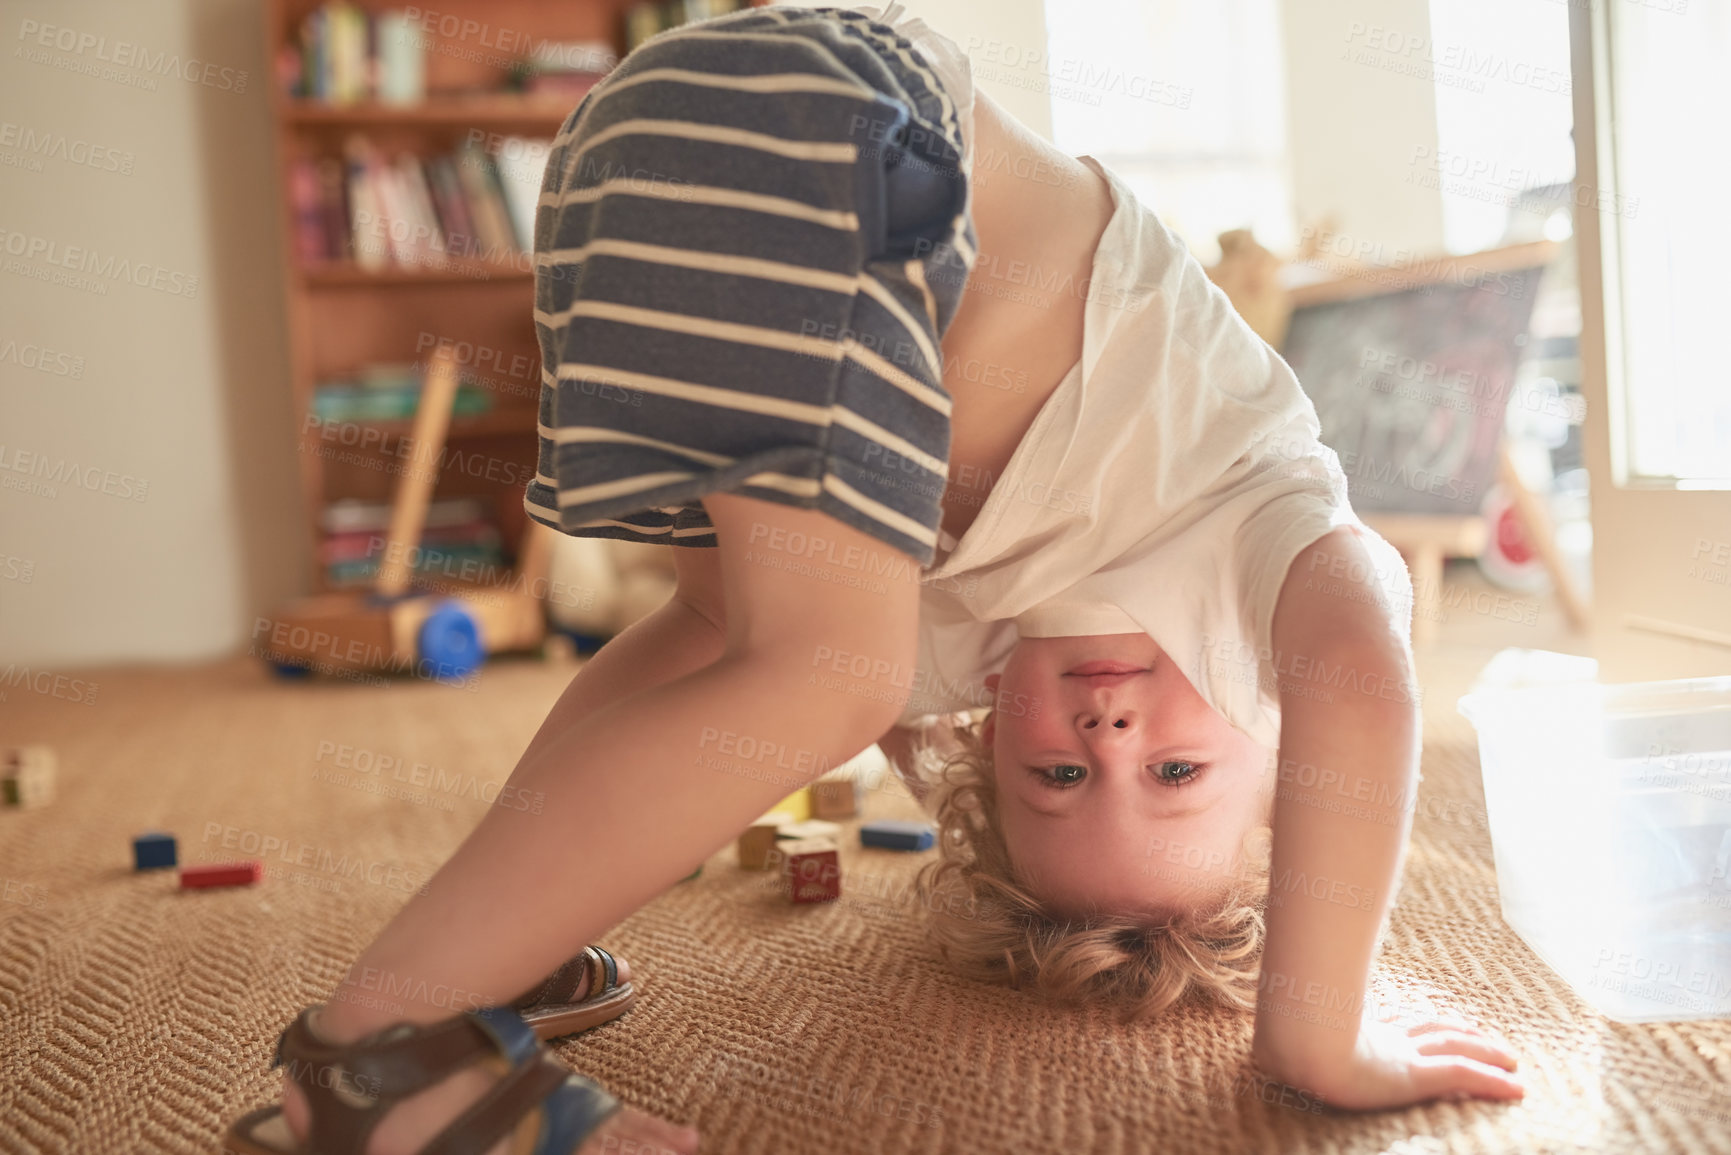 Buy stock photo Shot of an adorable little boy trying to do a handstand at home